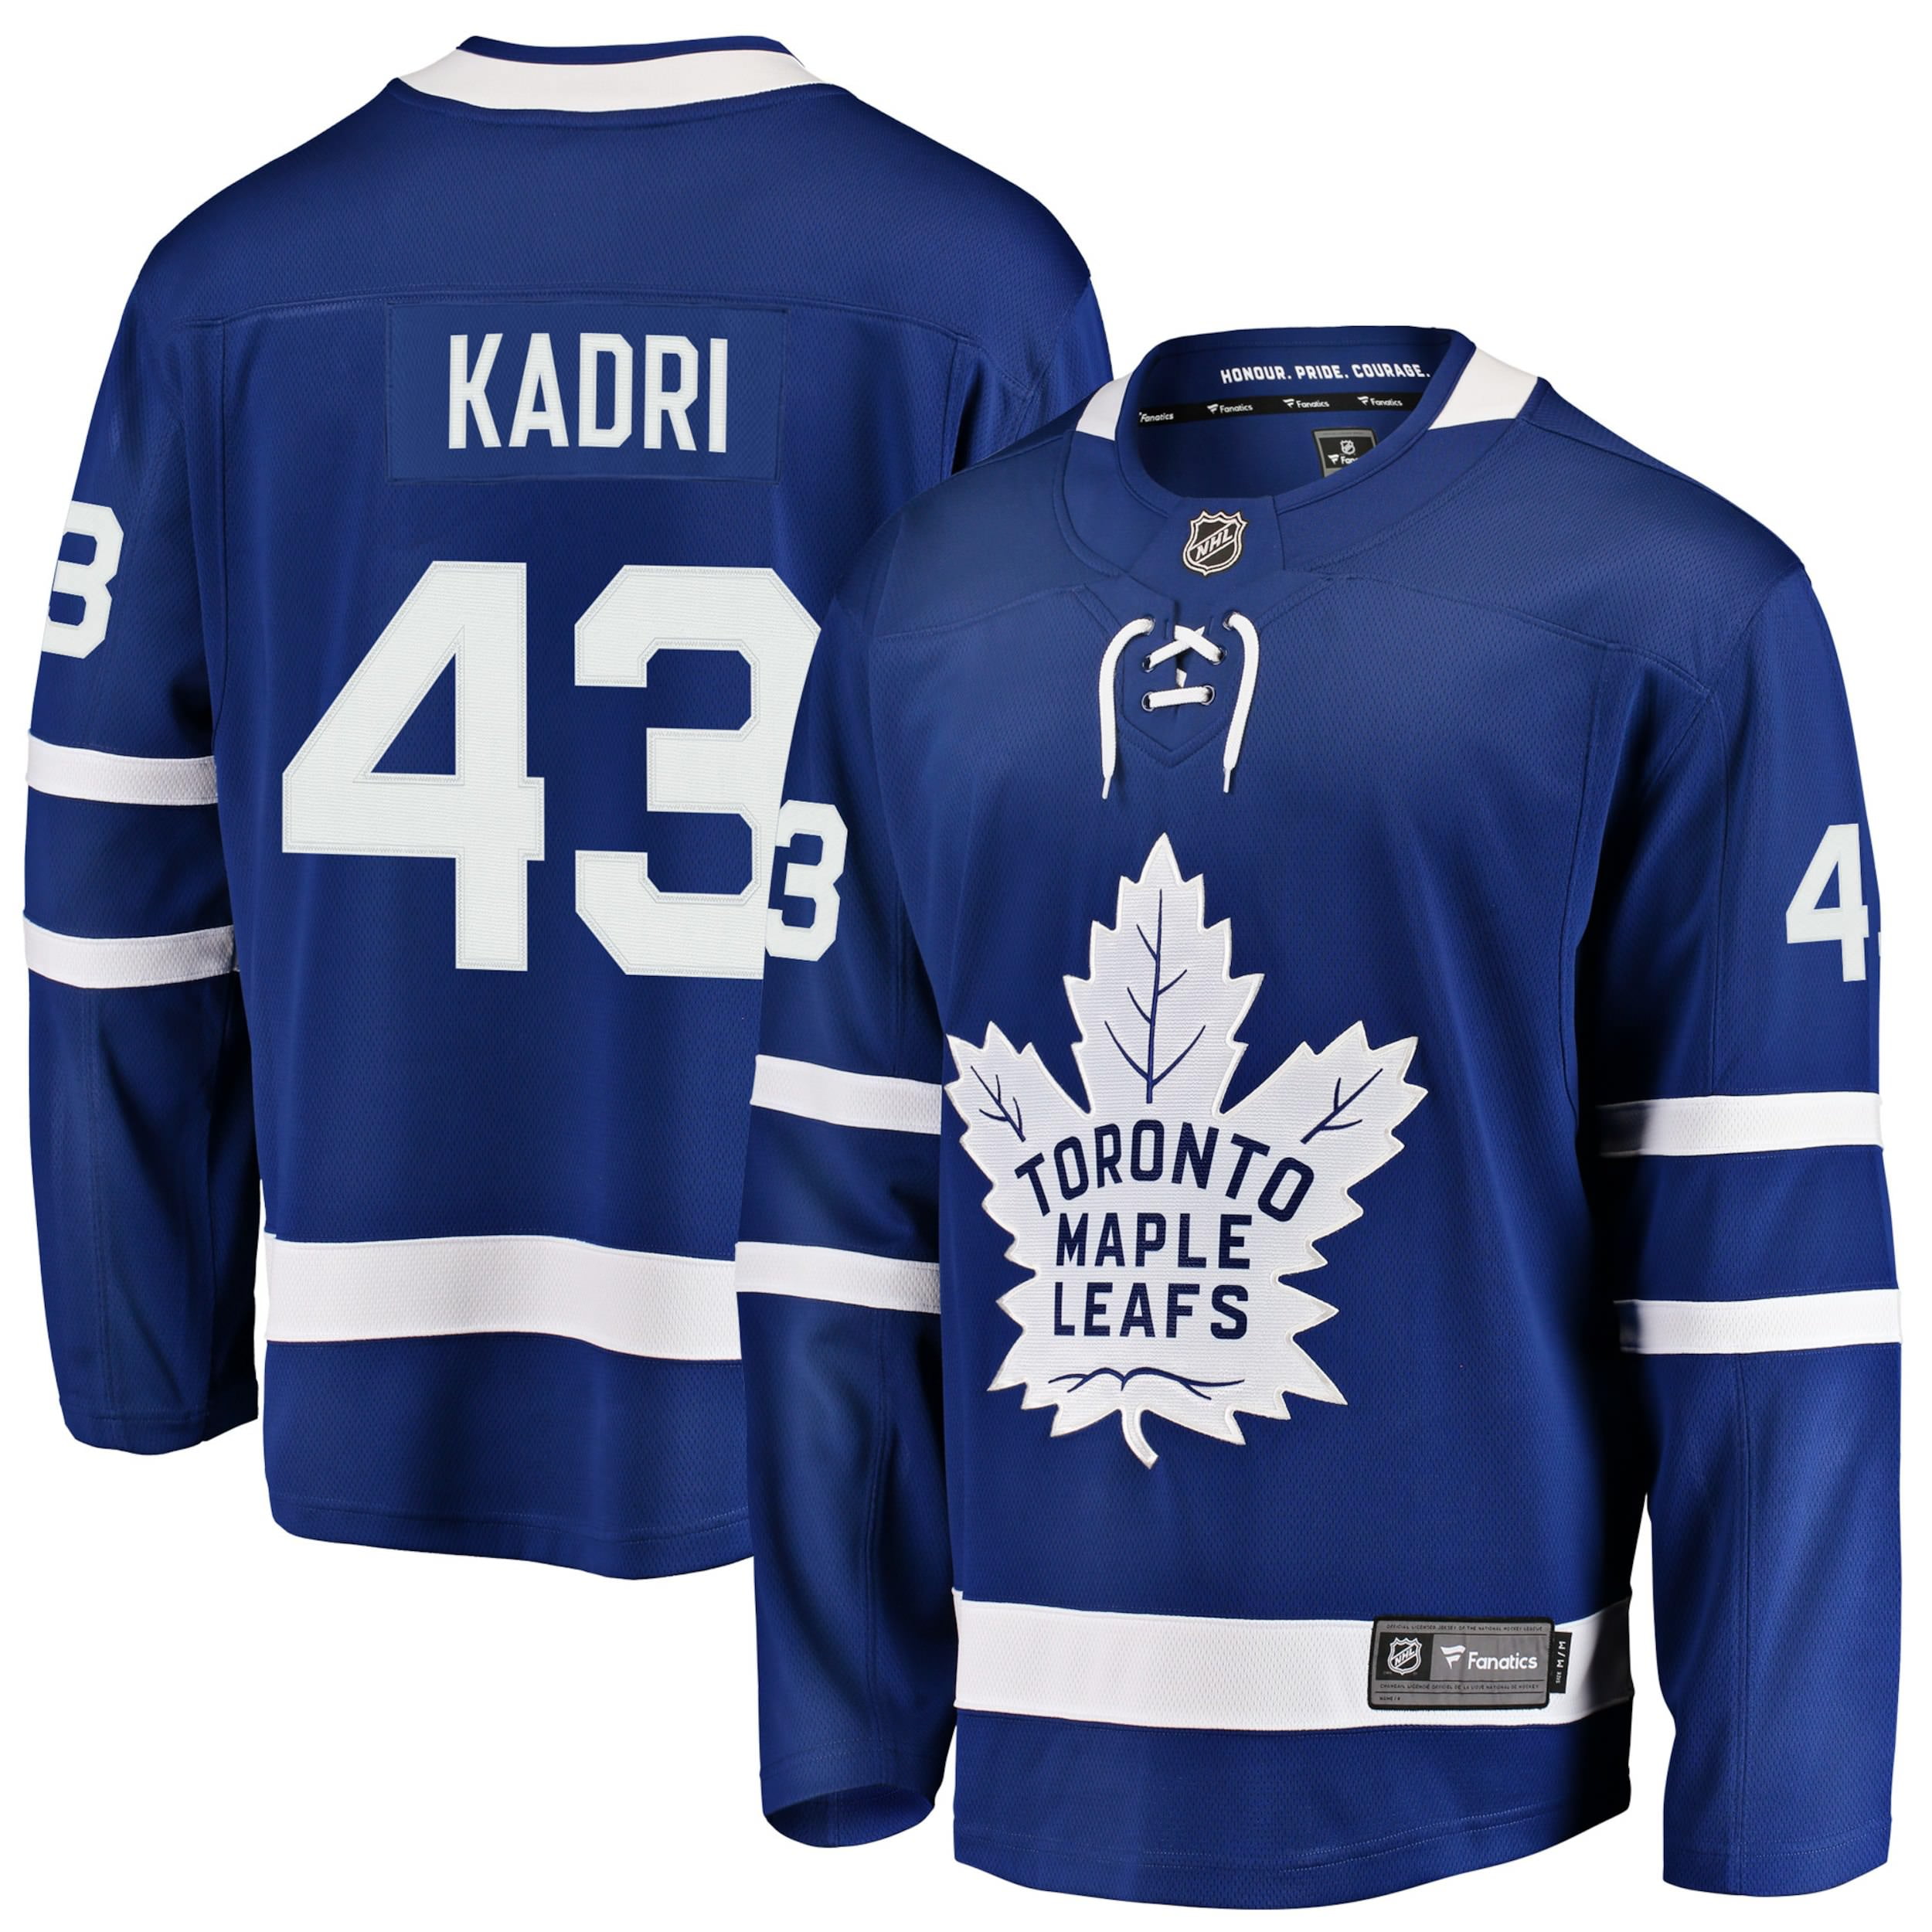 where to buy leafs jersey